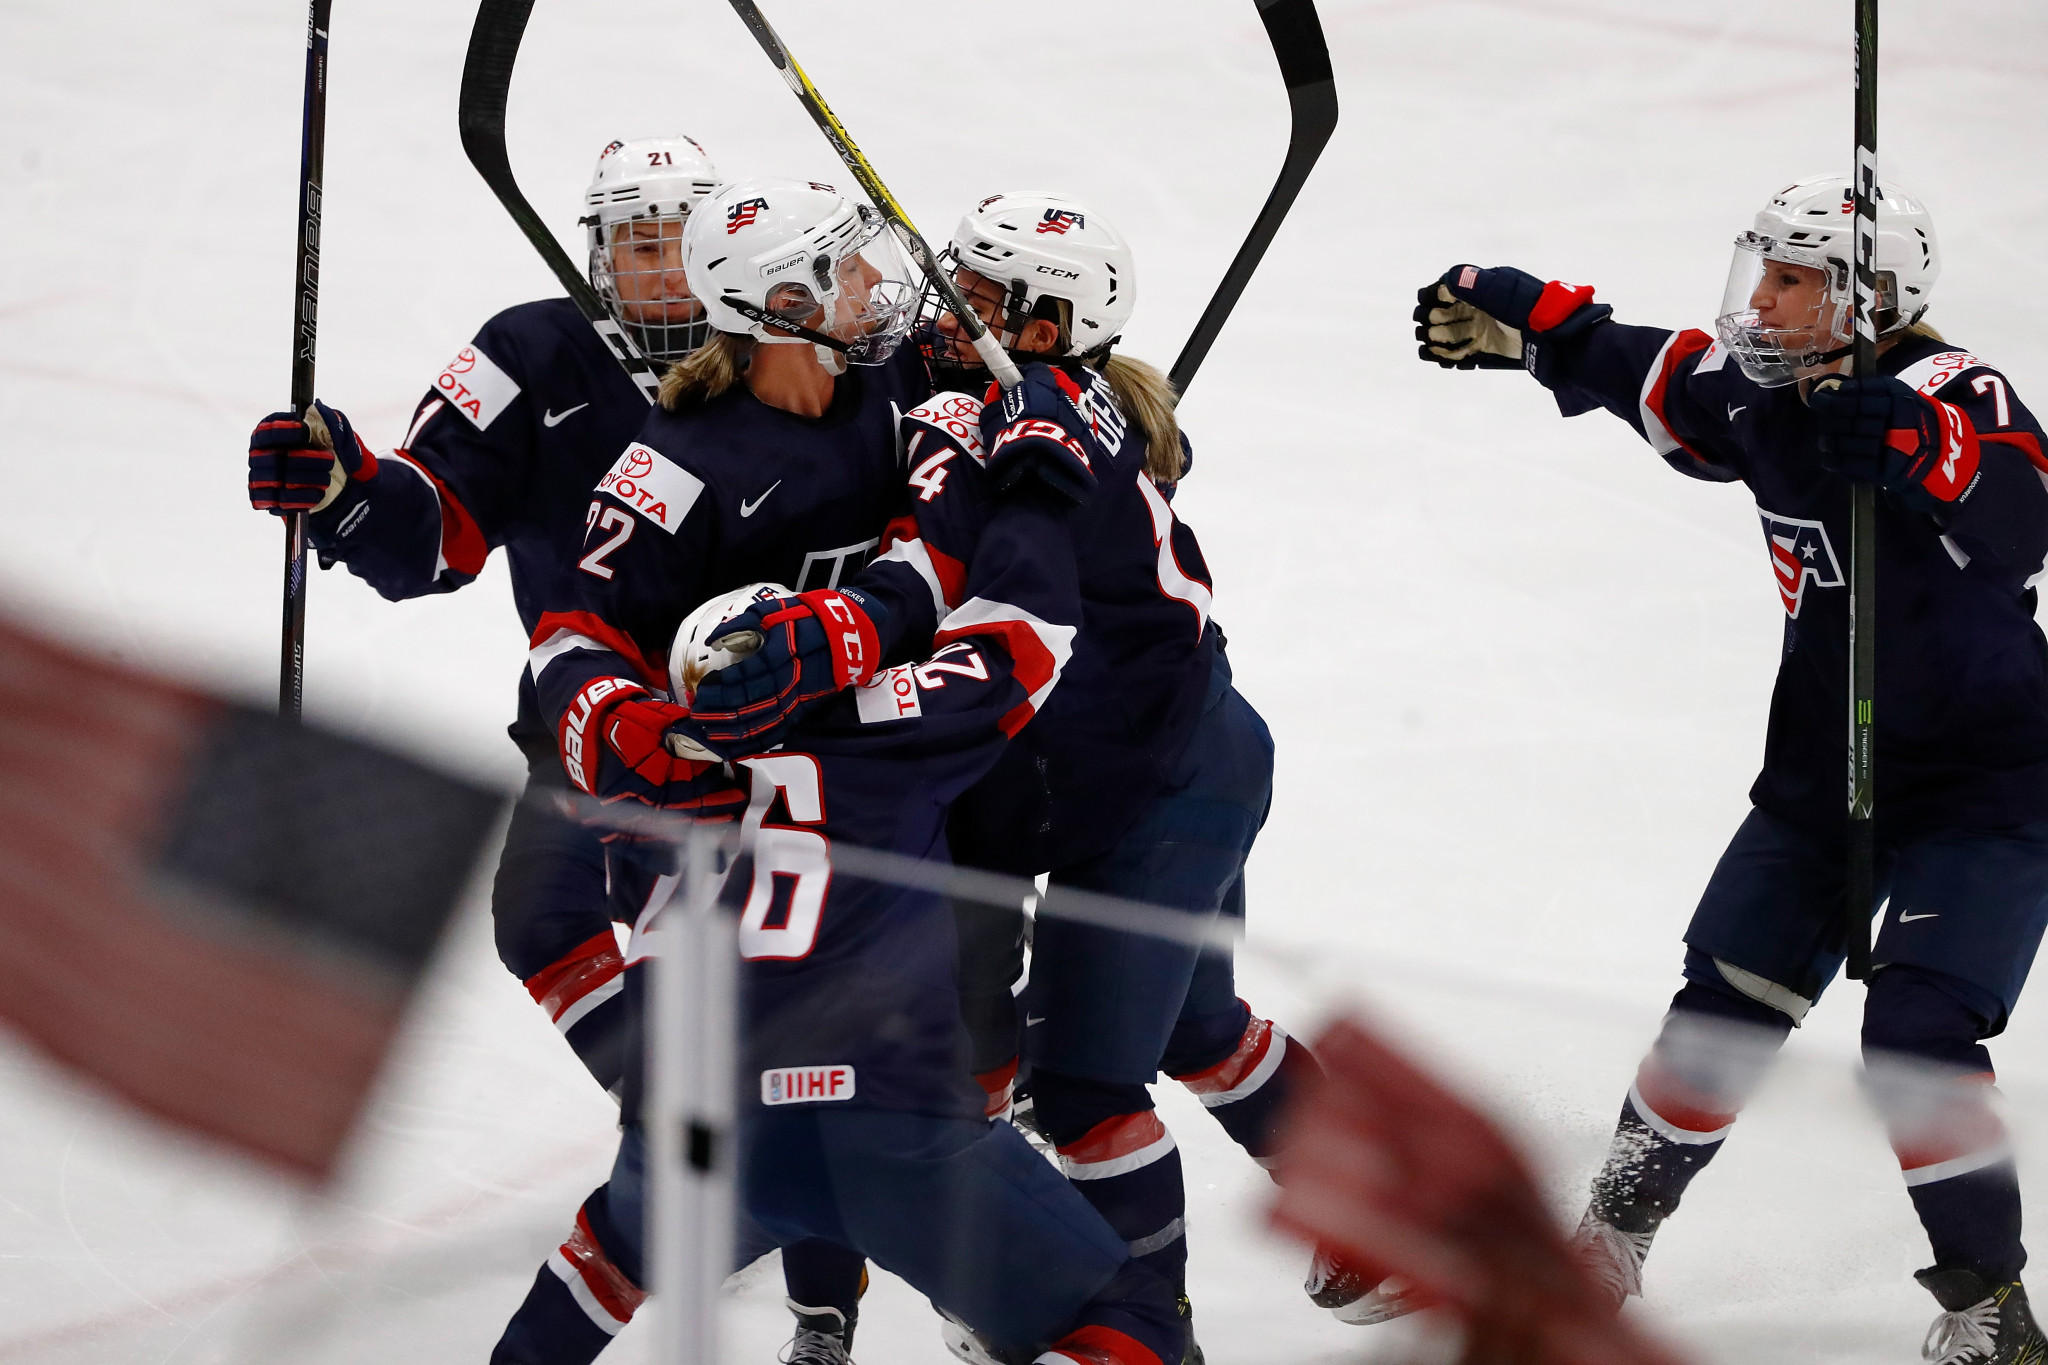 USA Hockey announce tour schedule as buildup continues to Pyeongchang 2018